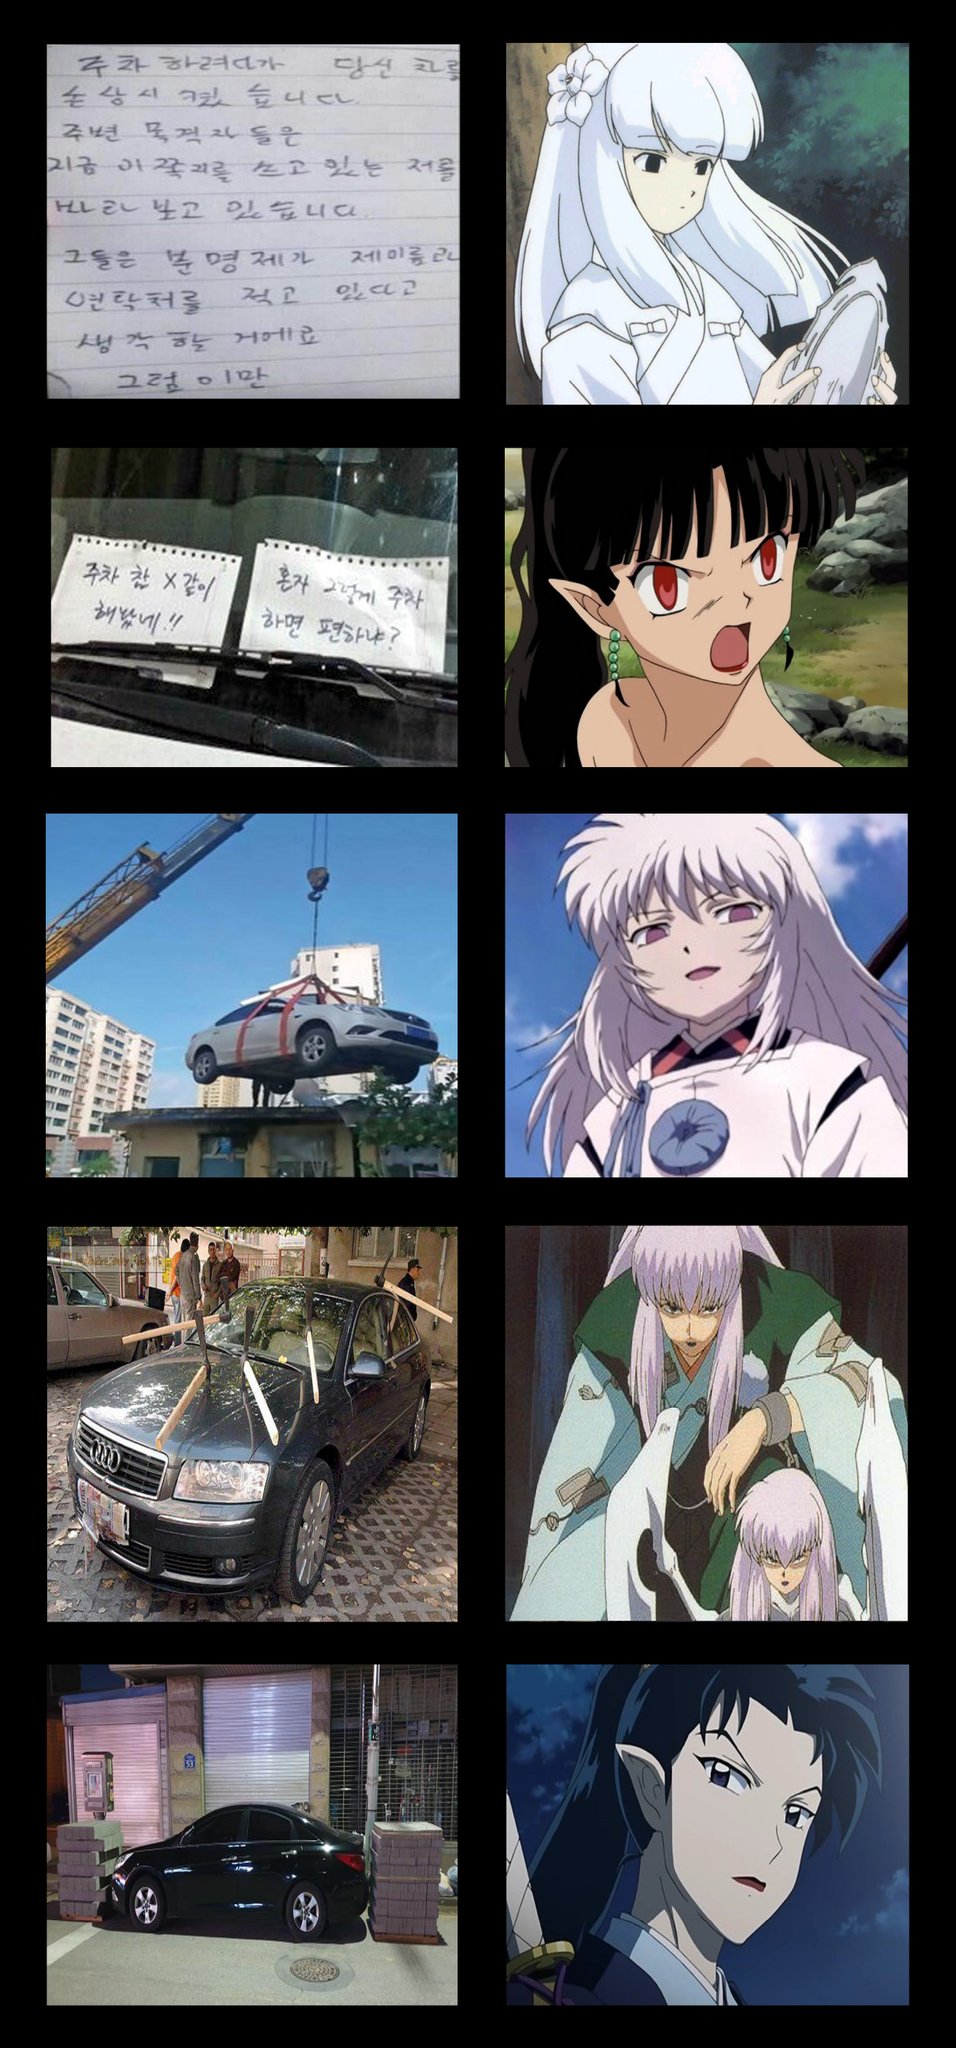 Illegal parking solution by Inuyasha character. JPG